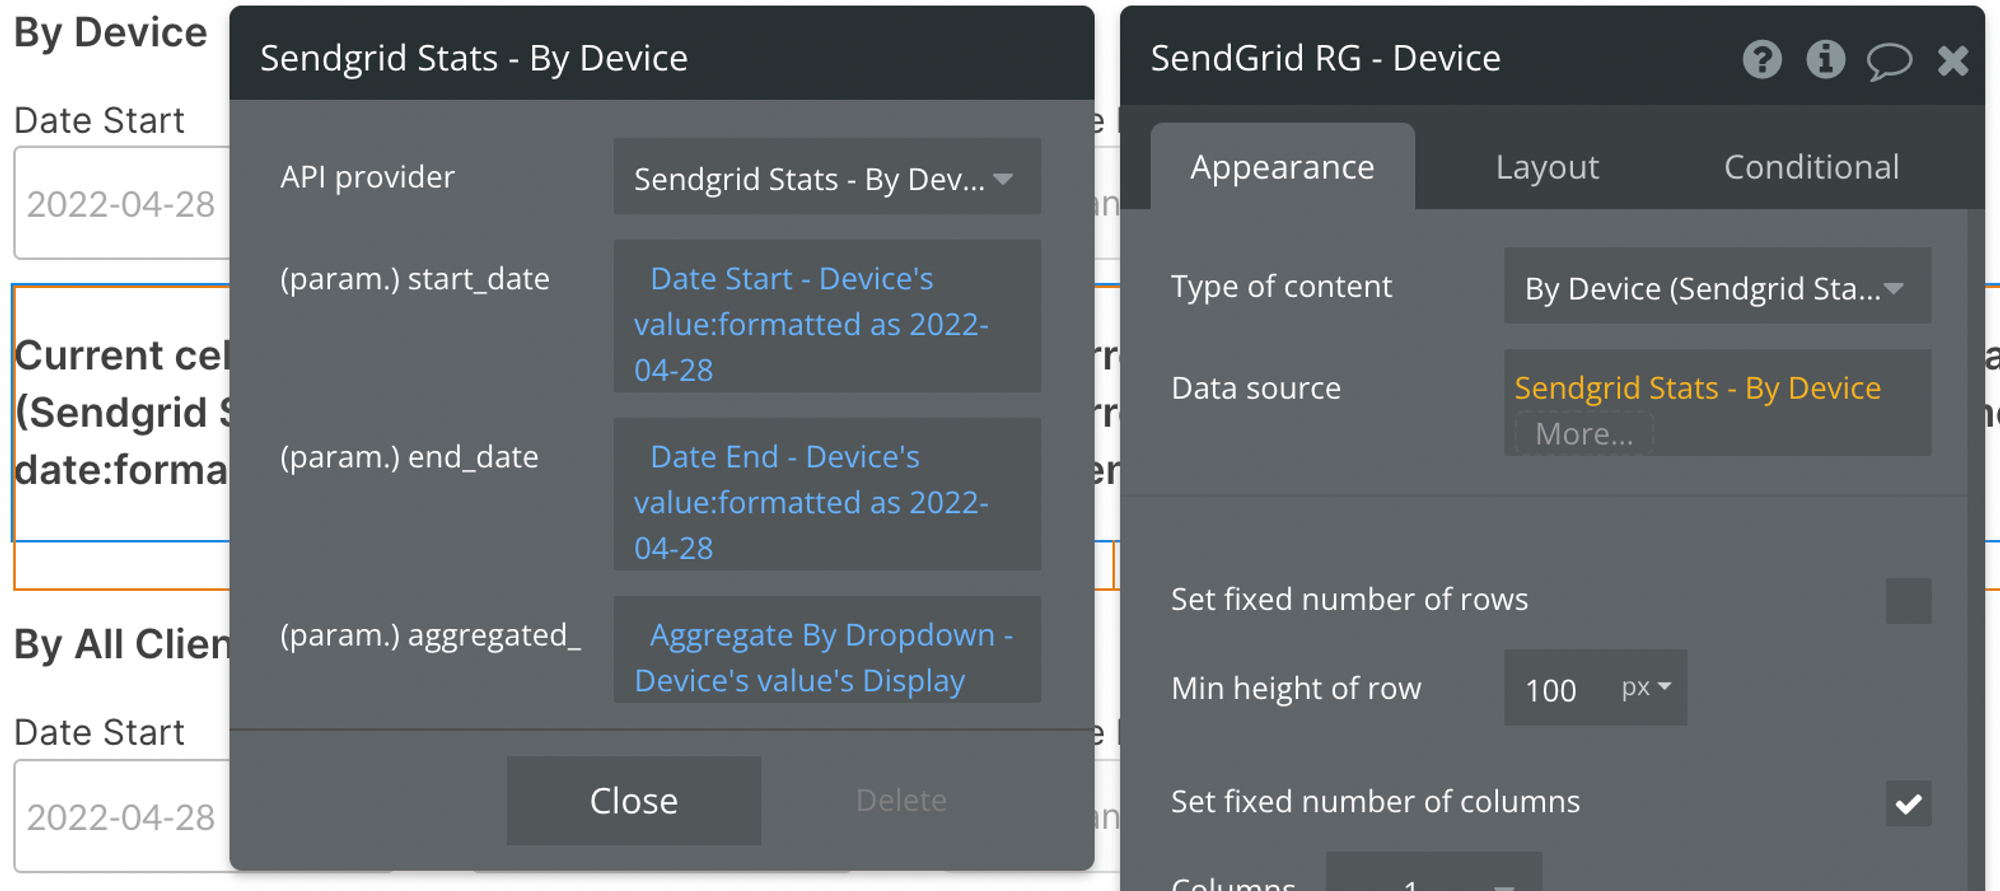 Select Sendgrid Stats - By Device from the API provider dropdown